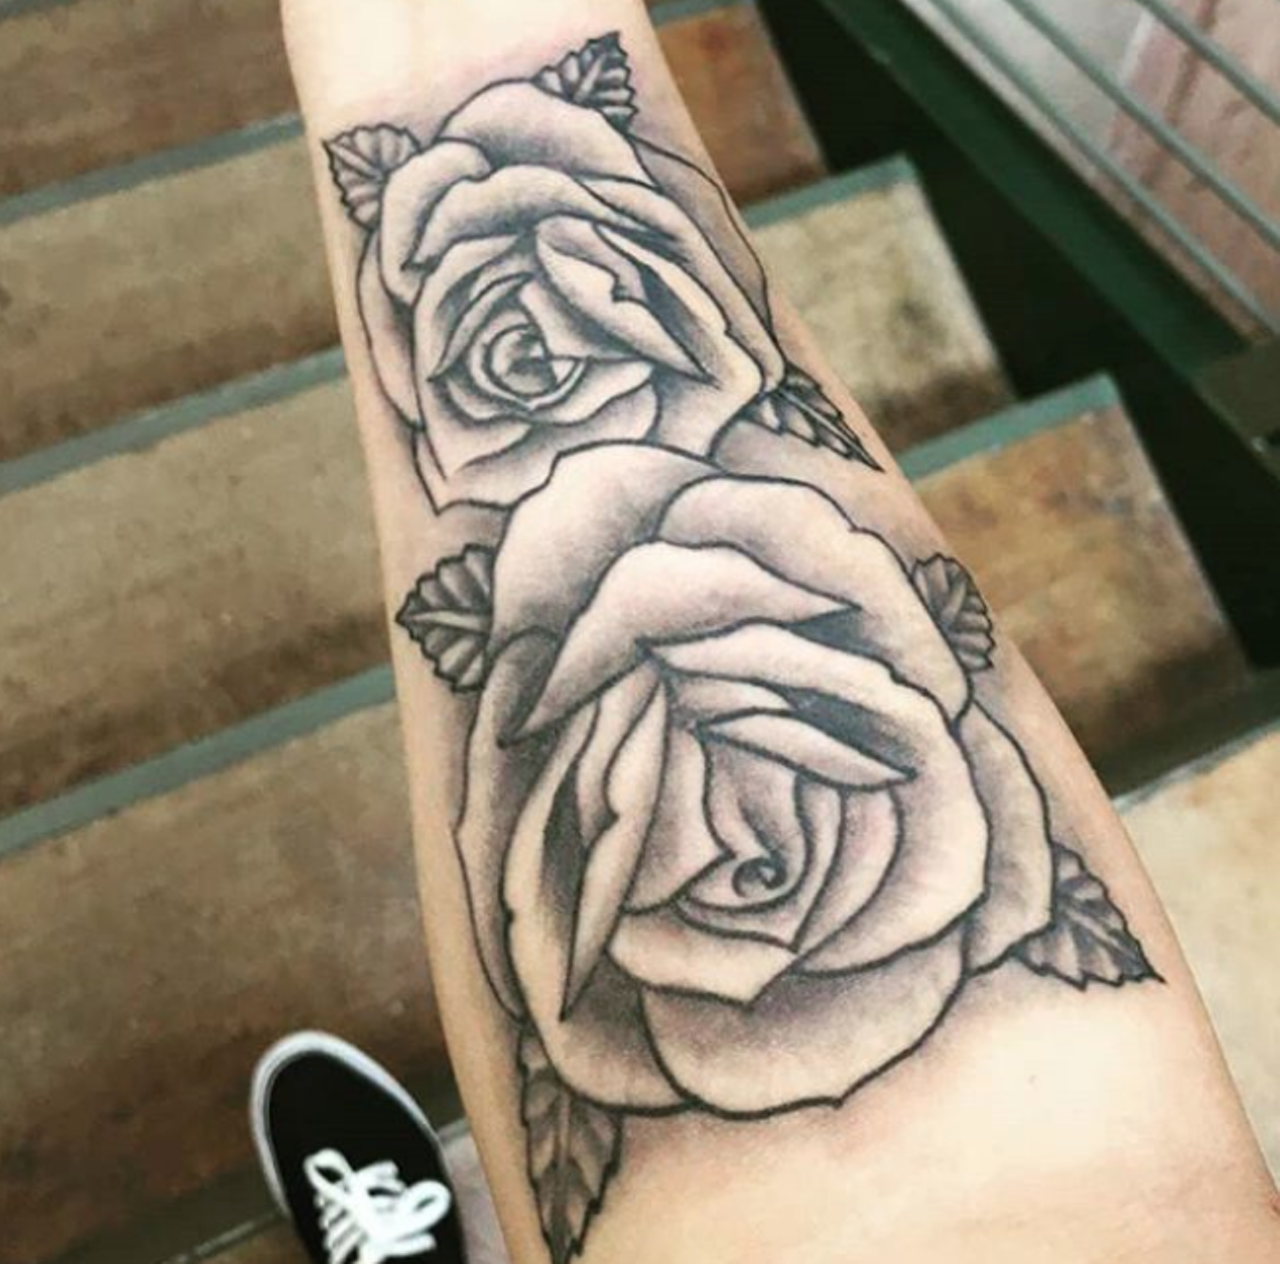 Drippin Ink
2606 W Southcross Blvd, (210) 257-6106, facebook.com
There’s two tiers of pre-selected tattoos – $13 with a $7 tip or $31 with a $9 tip. There’s also the $13 piercing with a $7 tip.
Photo via Instagram / drippin_ink2606